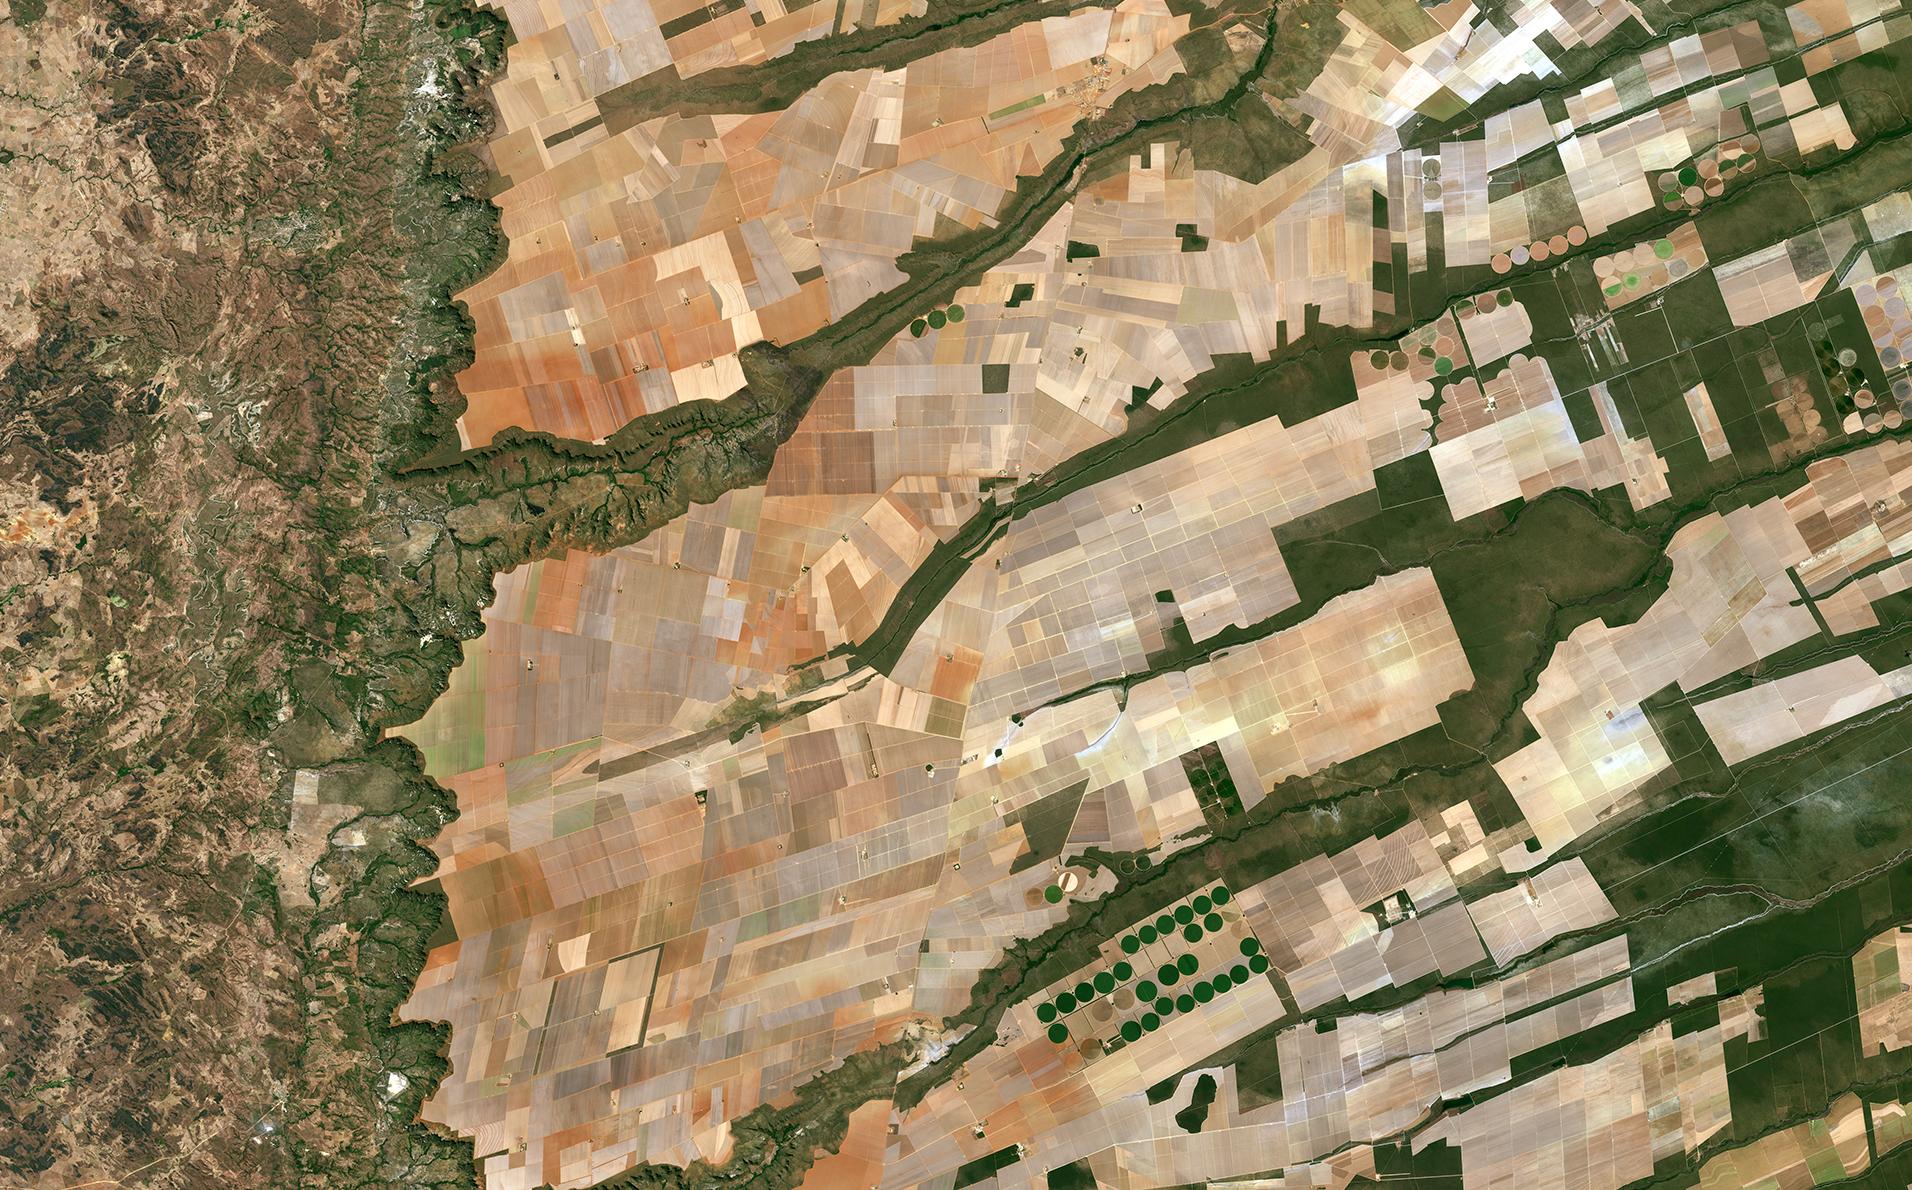 European Space Agency Sentinel 2A image of Brazilian farms from space. From ESA: "Here we can see a large, flat plateau blanked with fields benefiting from rich soils and an apparent abundance of water, before falling off into a green, hilly valley (left)